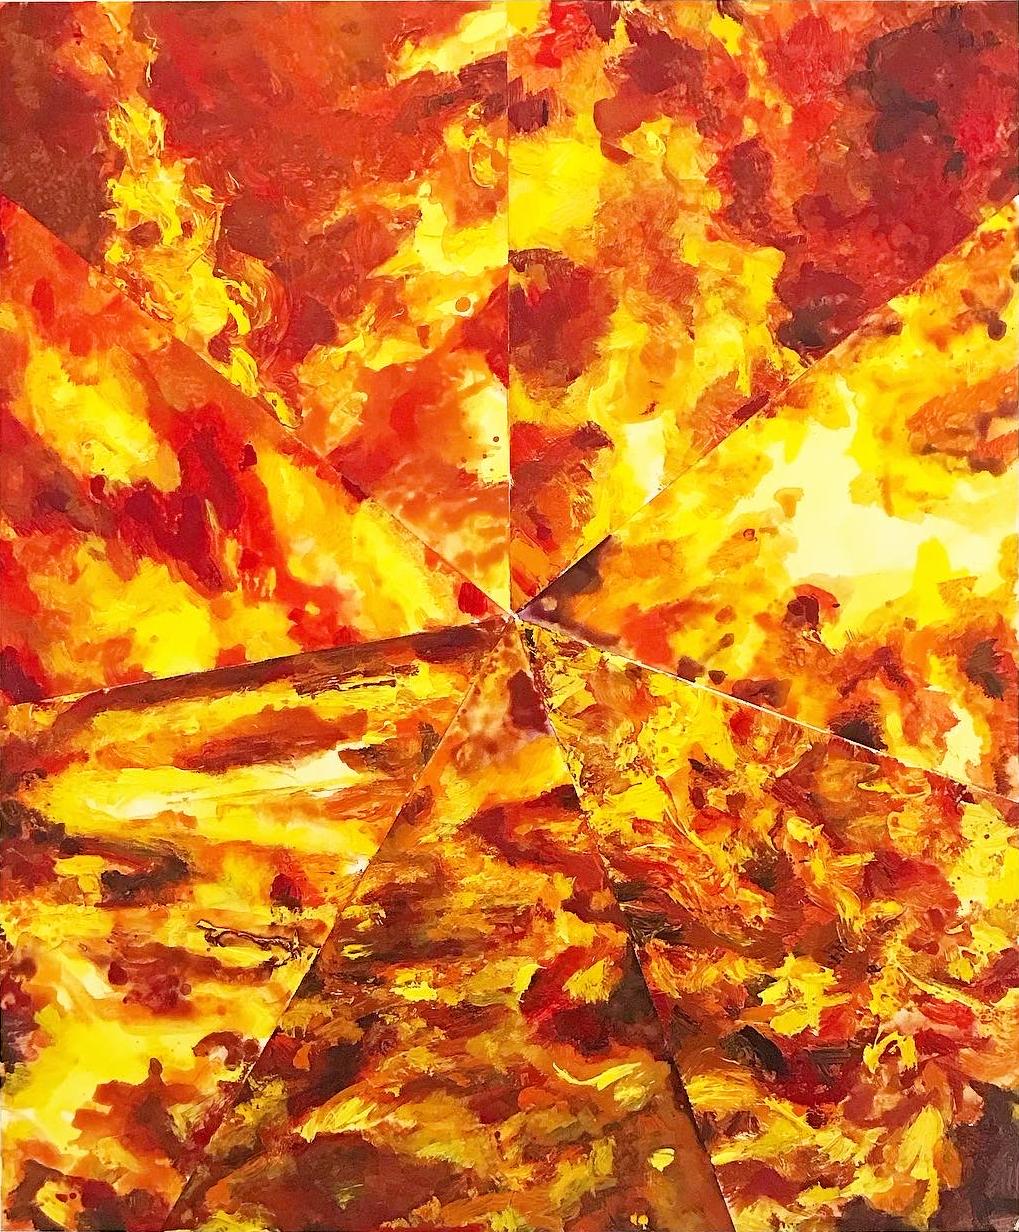 Mat Tomezsko Abstract Painting - Seven Fires: geometric abstract painting of fire in yellow, red & orange